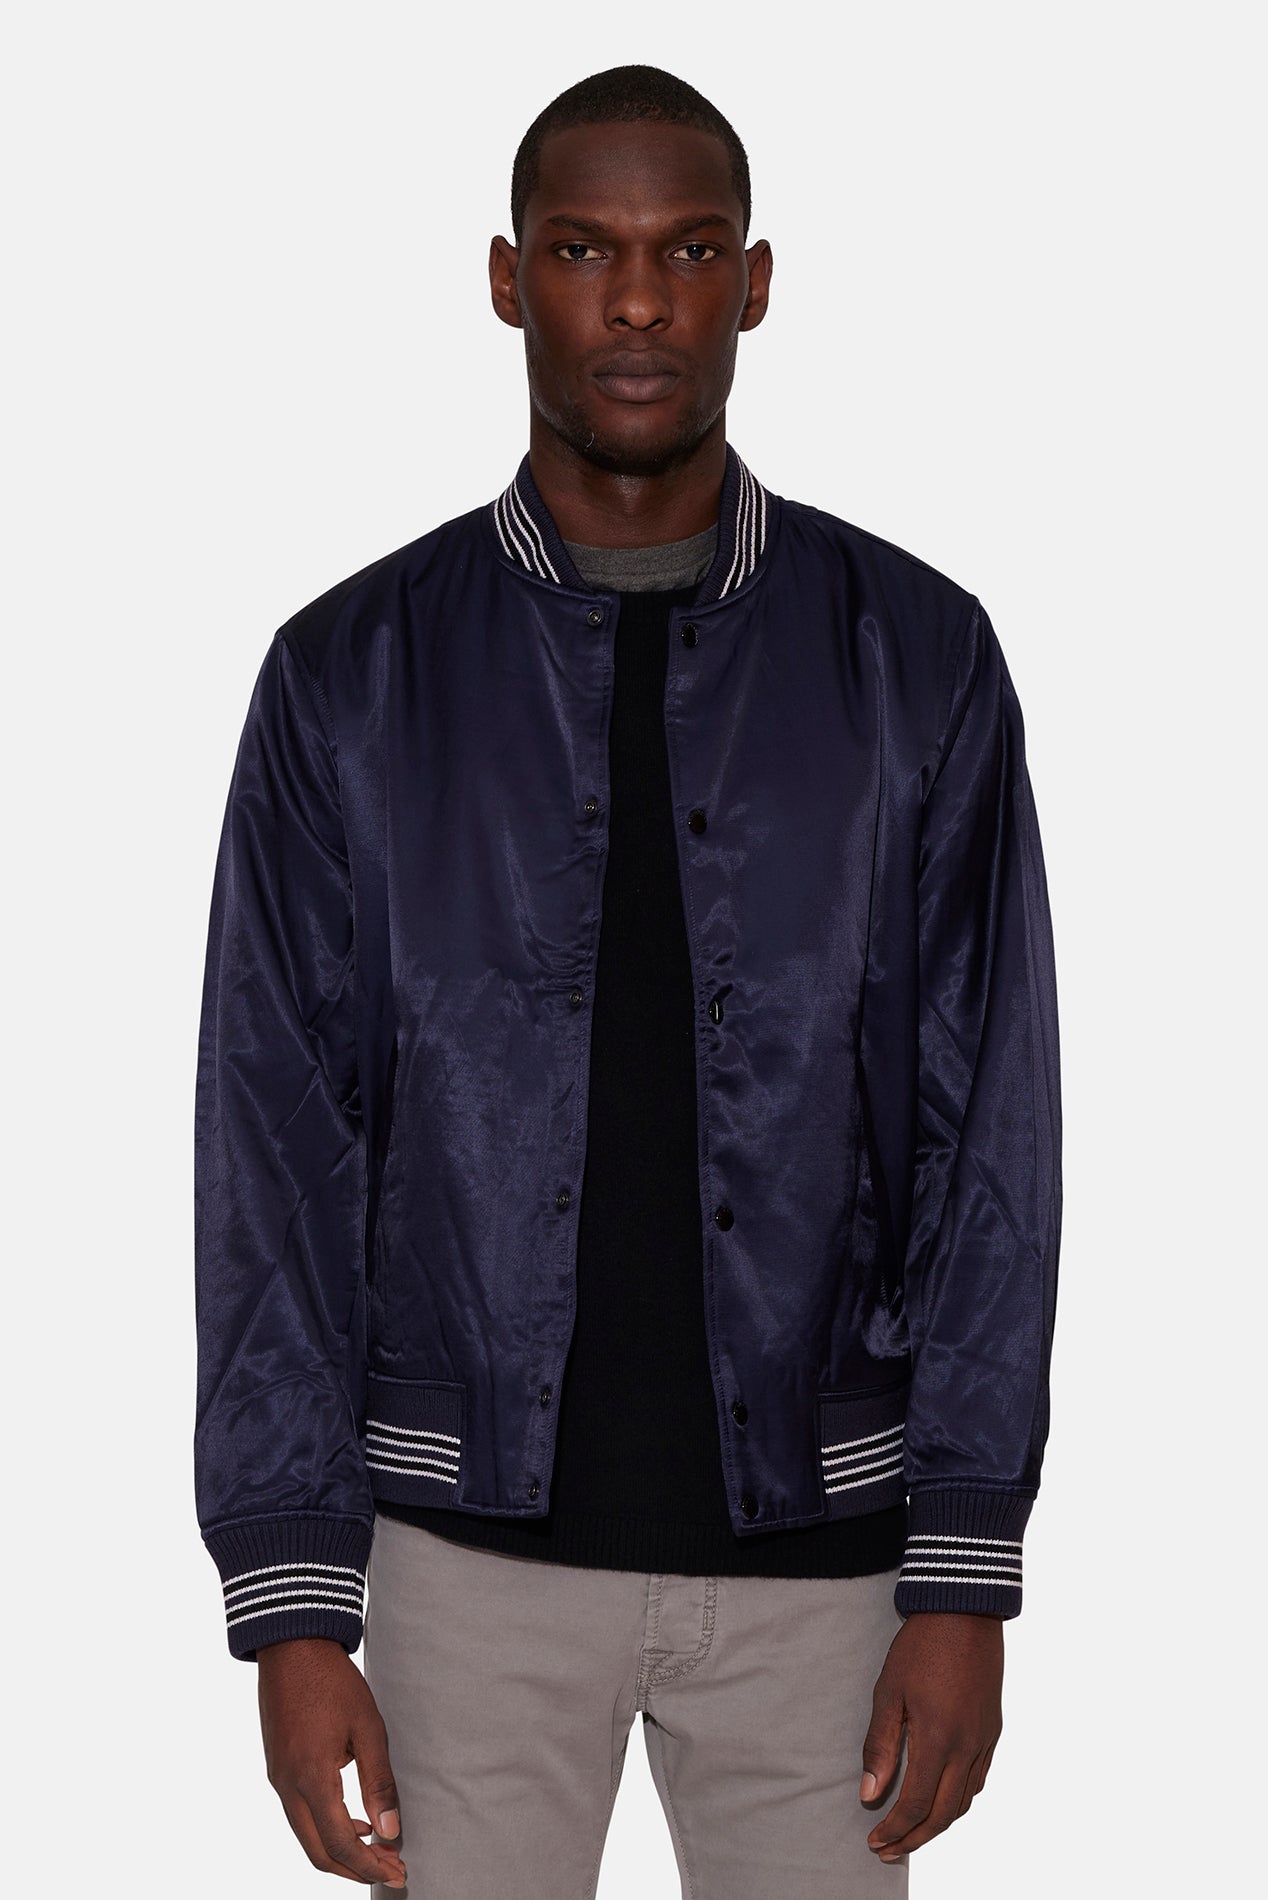 Rag & Bone Dugout Satin Jacket Salute in Blue, Size Small - Outerwear